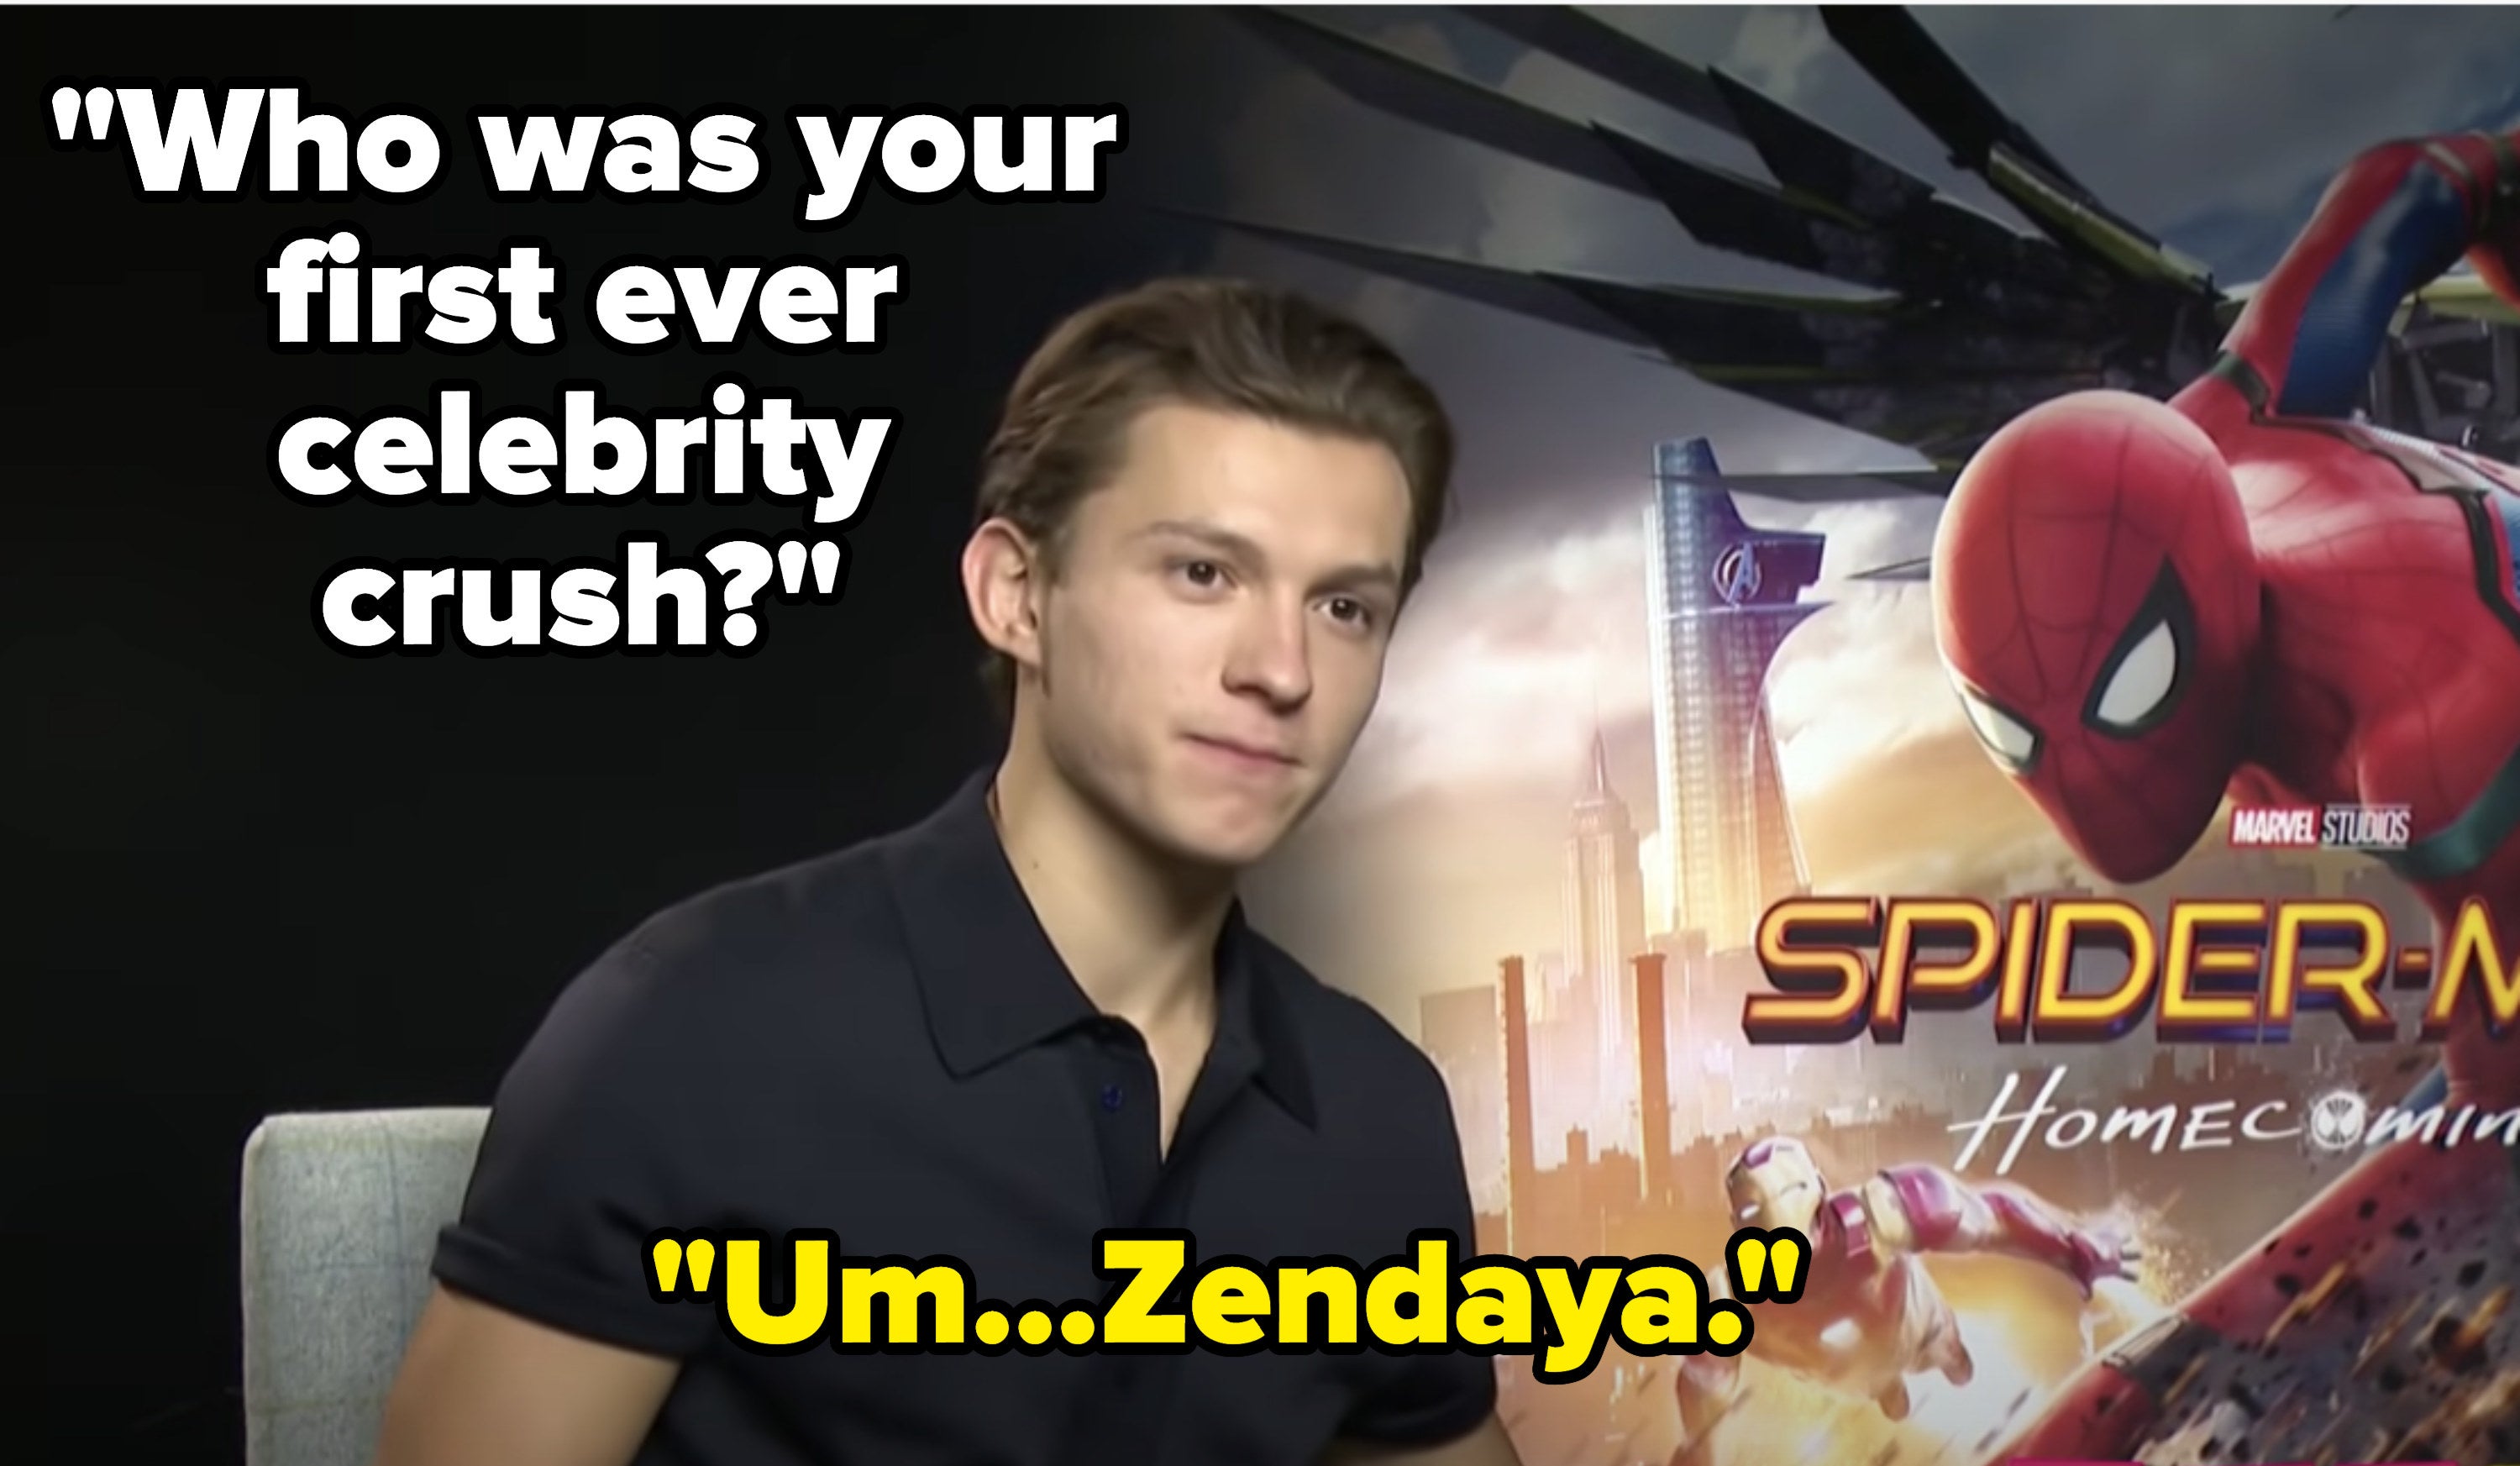 Tom is asked who was his first celebrity crush, and he says Zendaya